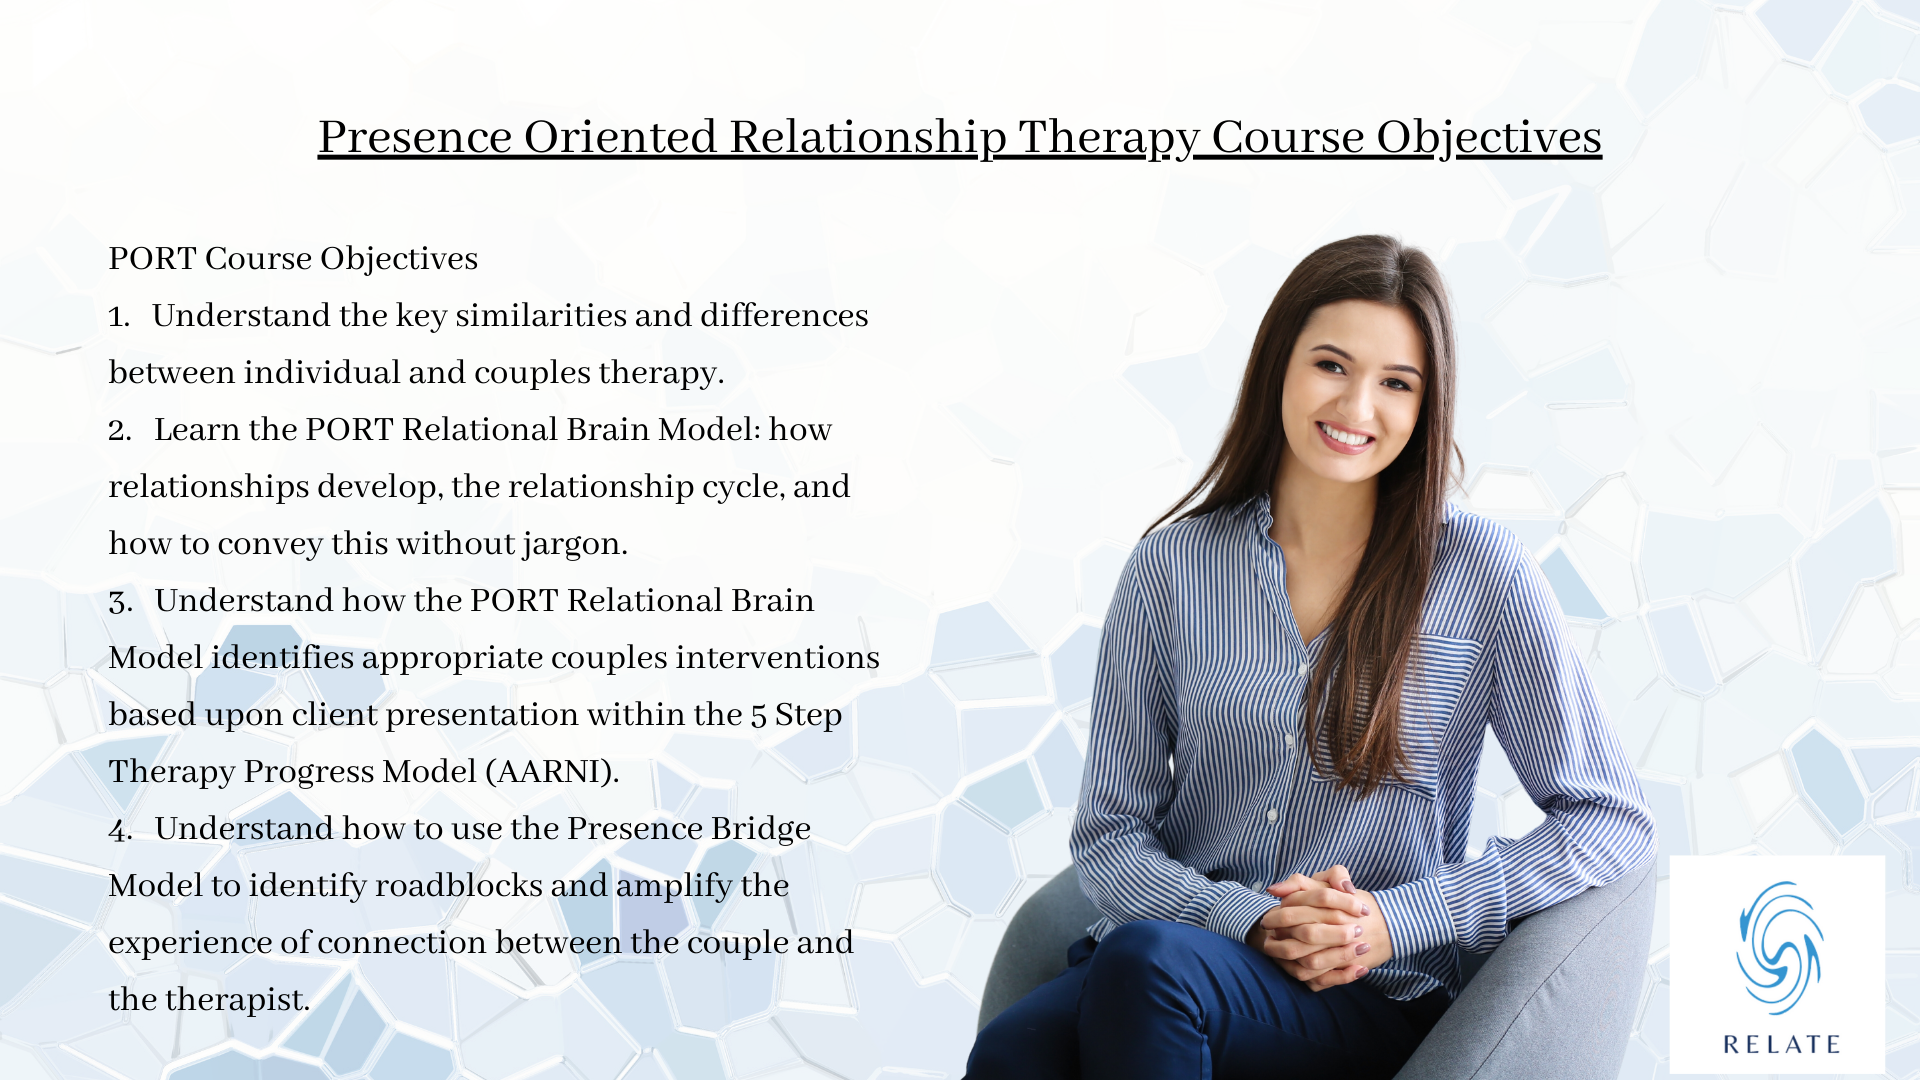 PORT: Presence Oriented Relationship Therapy